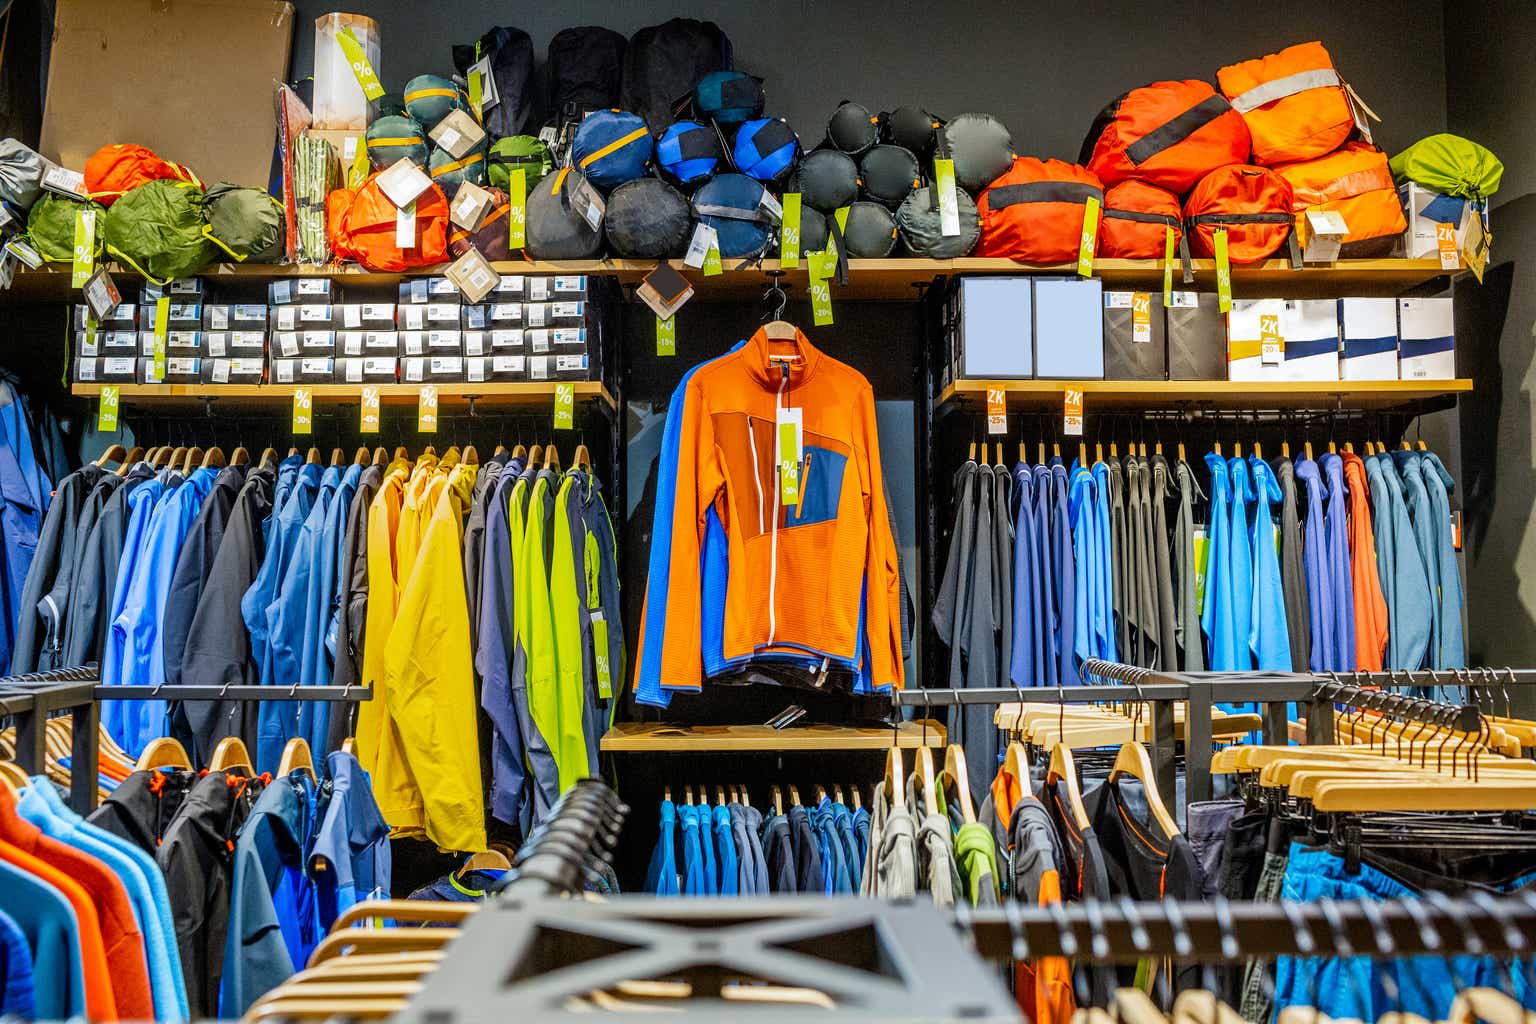 Academy Sports And Outdoors Aims For Faster Store Growth In 2023  (NASDAQ:ASO)